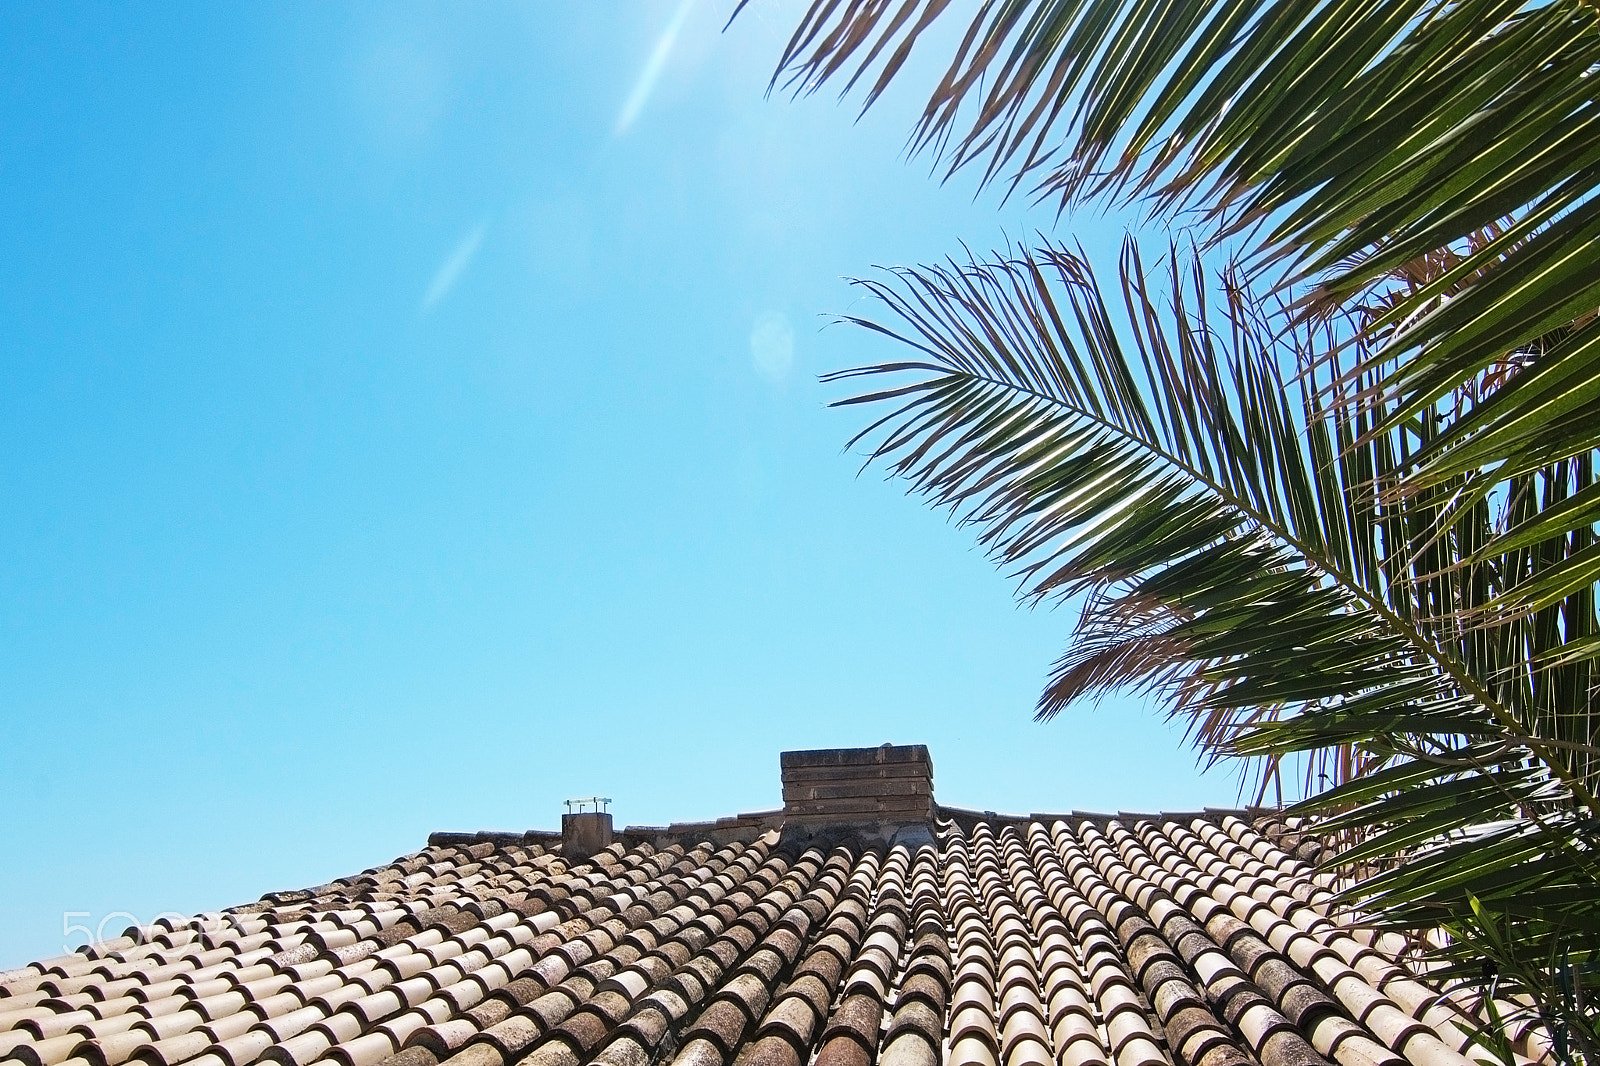 Nikon D7100 sample photo. Tiled roof and palm tree photography